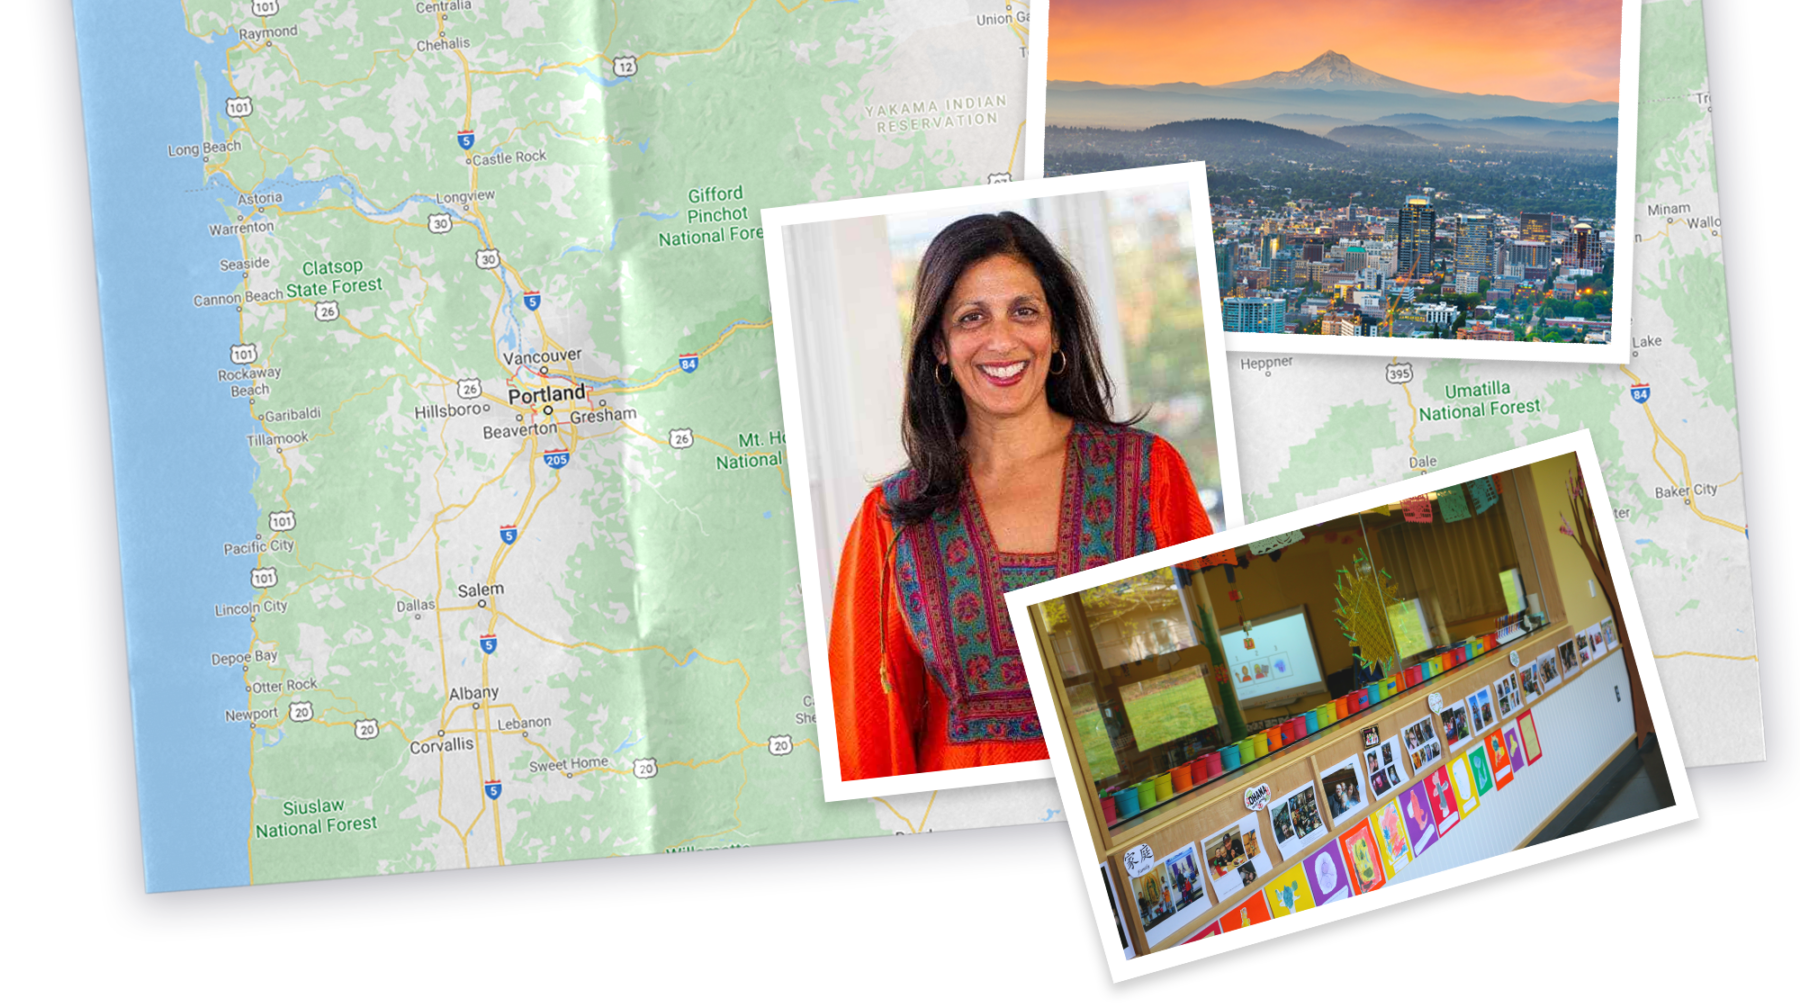 Collage of map and photos of Oregon and photo of Swati Adarkar